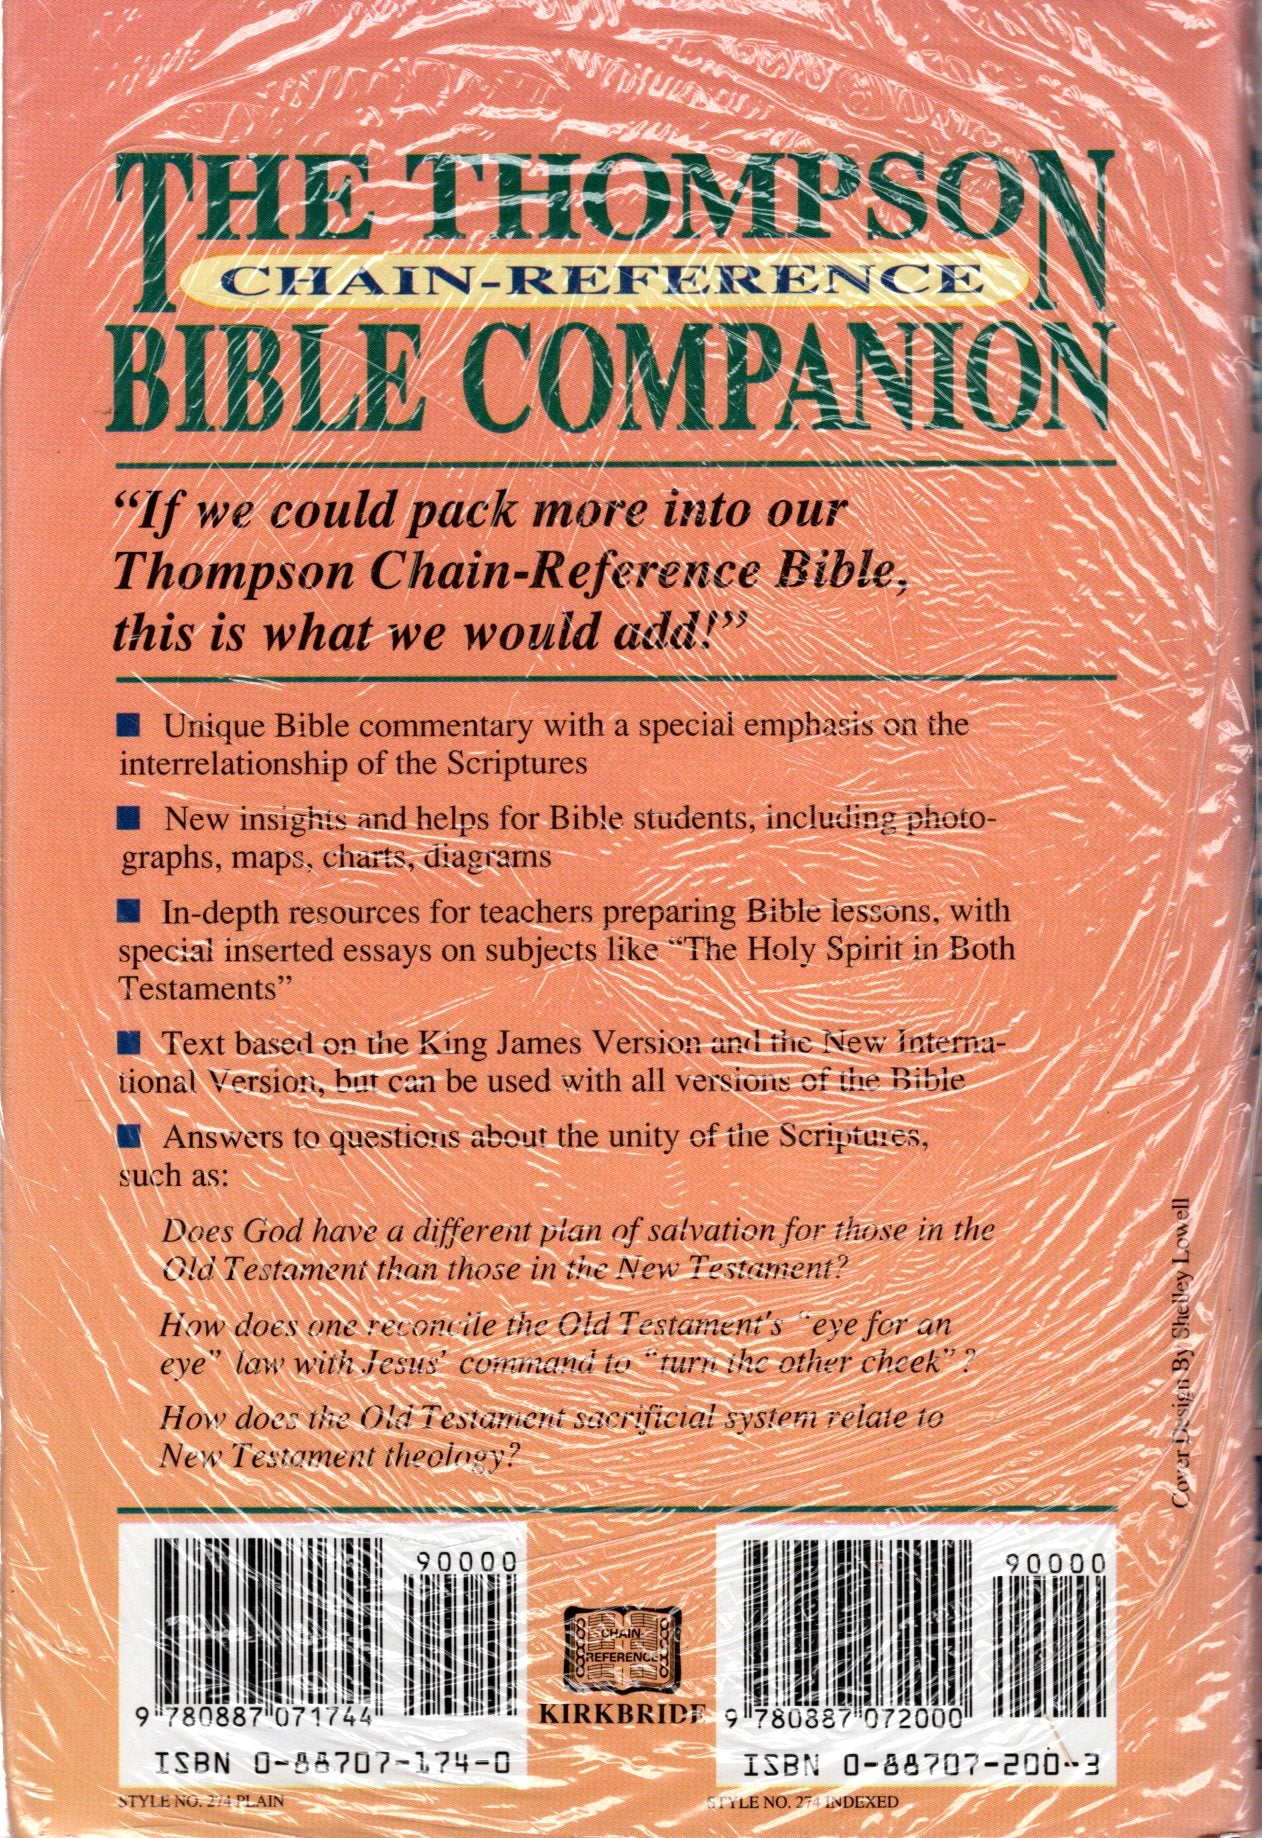 Kirkbride Bible Co., The Thompson Chain-Reference Bible Companion: A Handbook for the Classic Chain-Reference Bible by Howard A. Hanke - Hardcover w/Dust Jacket